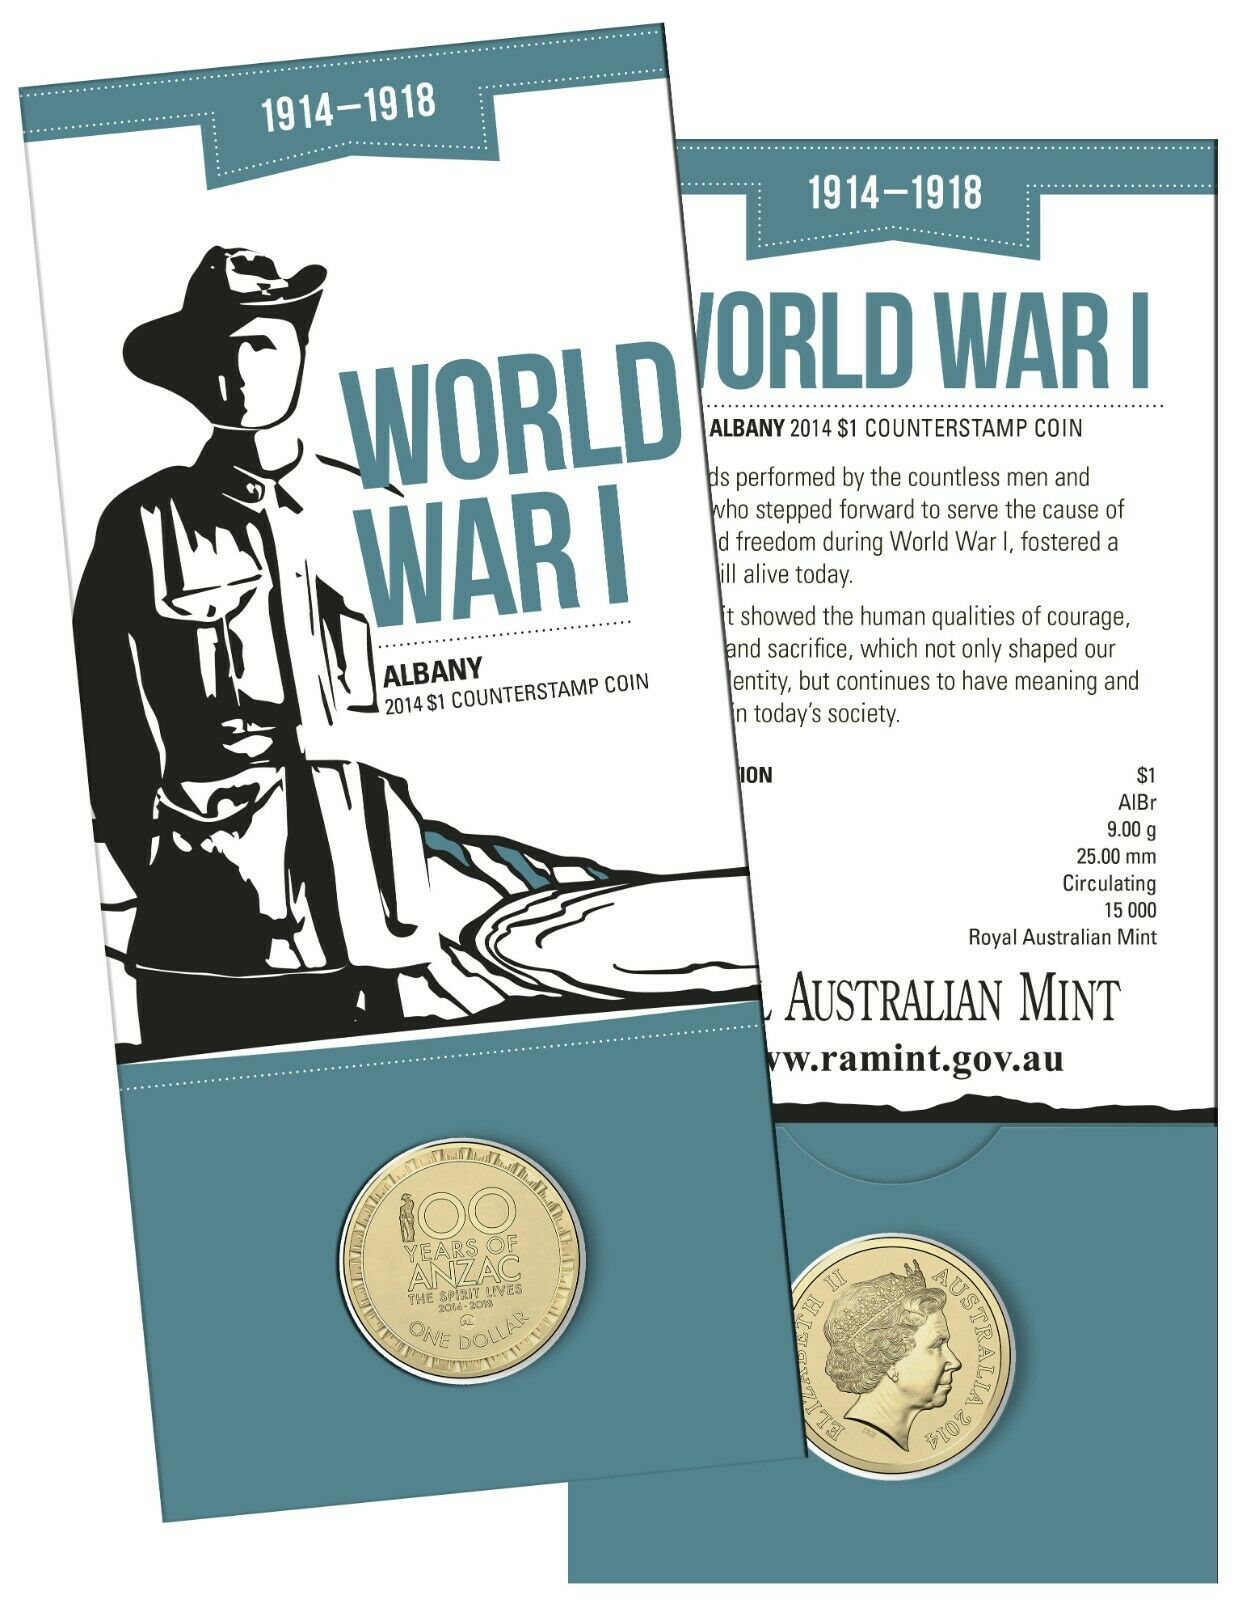 Thumbnail for 2014 Australia 100 Years of WWI $1.00 with Albany Counterstamp